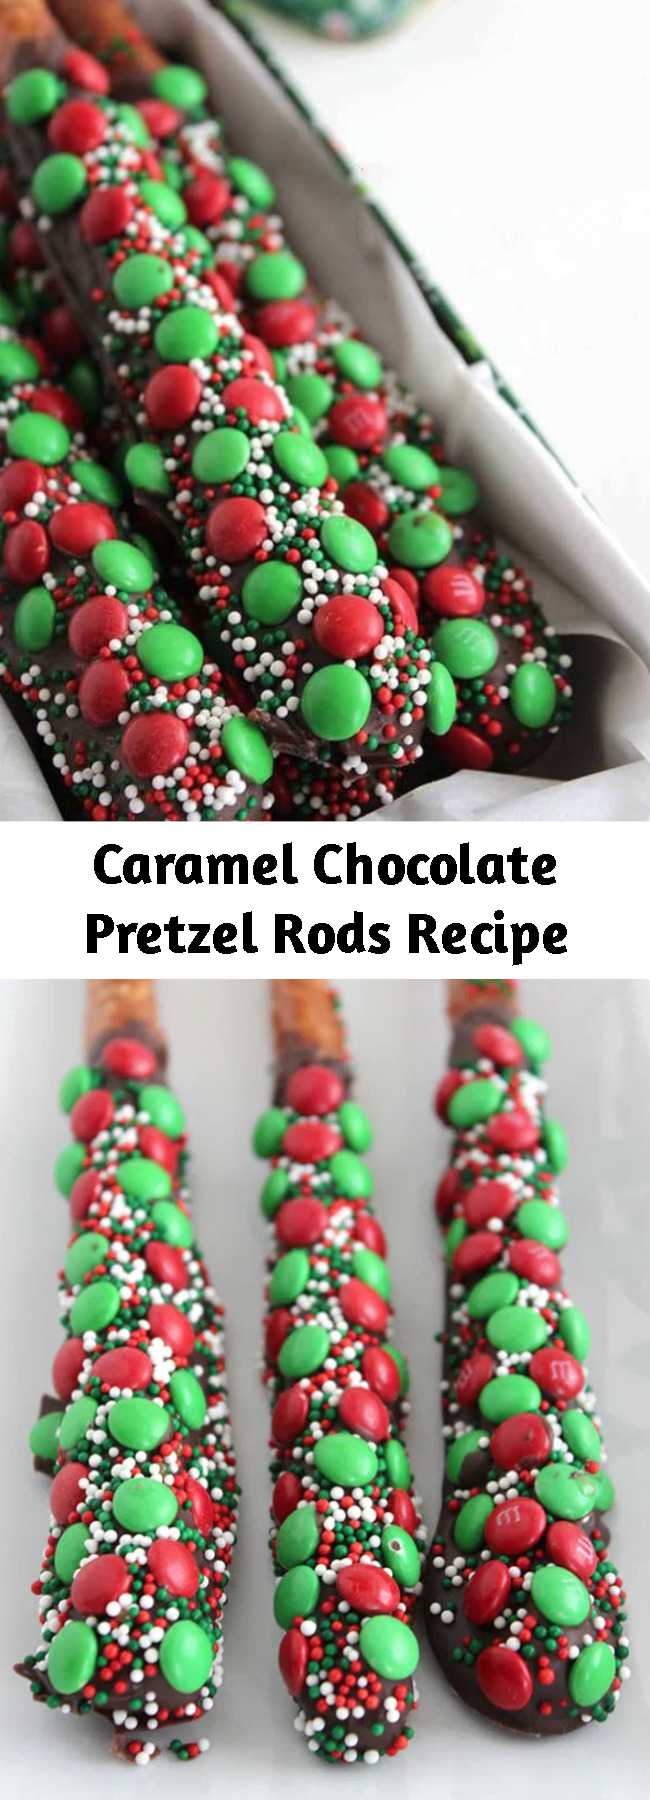 Caramel Chocolate Pretzel Rods Recipe - If you are needing some Christmas food gift inspiration, these Caramel and Chocolate Pretzel Rods will be perfect for gifting this holiday season. Simple to make, no need to buy gourmet.